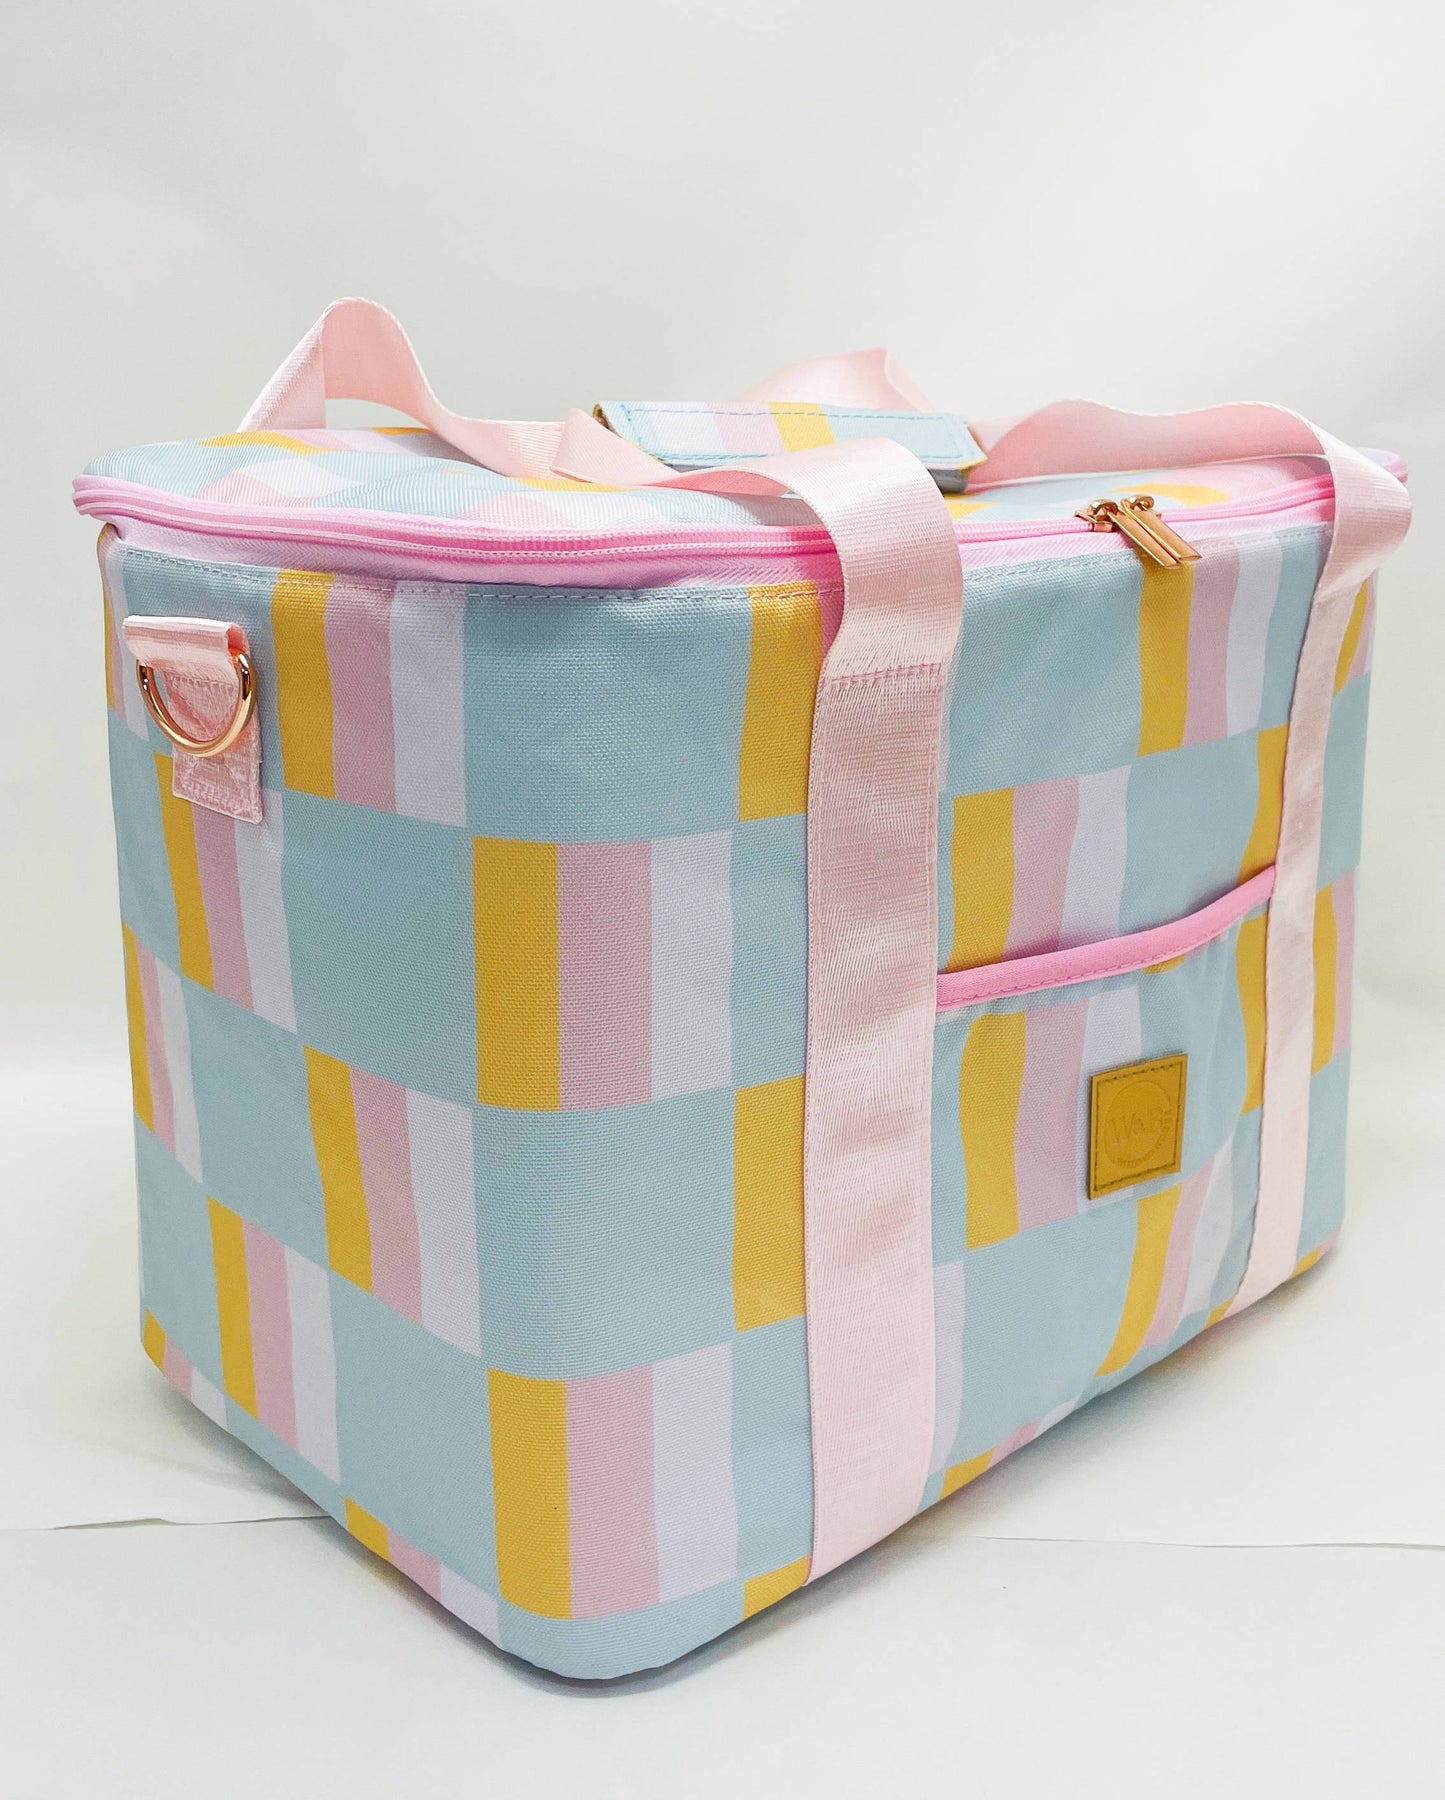 Pastel Squared Insulated Picnic Cooler Bag